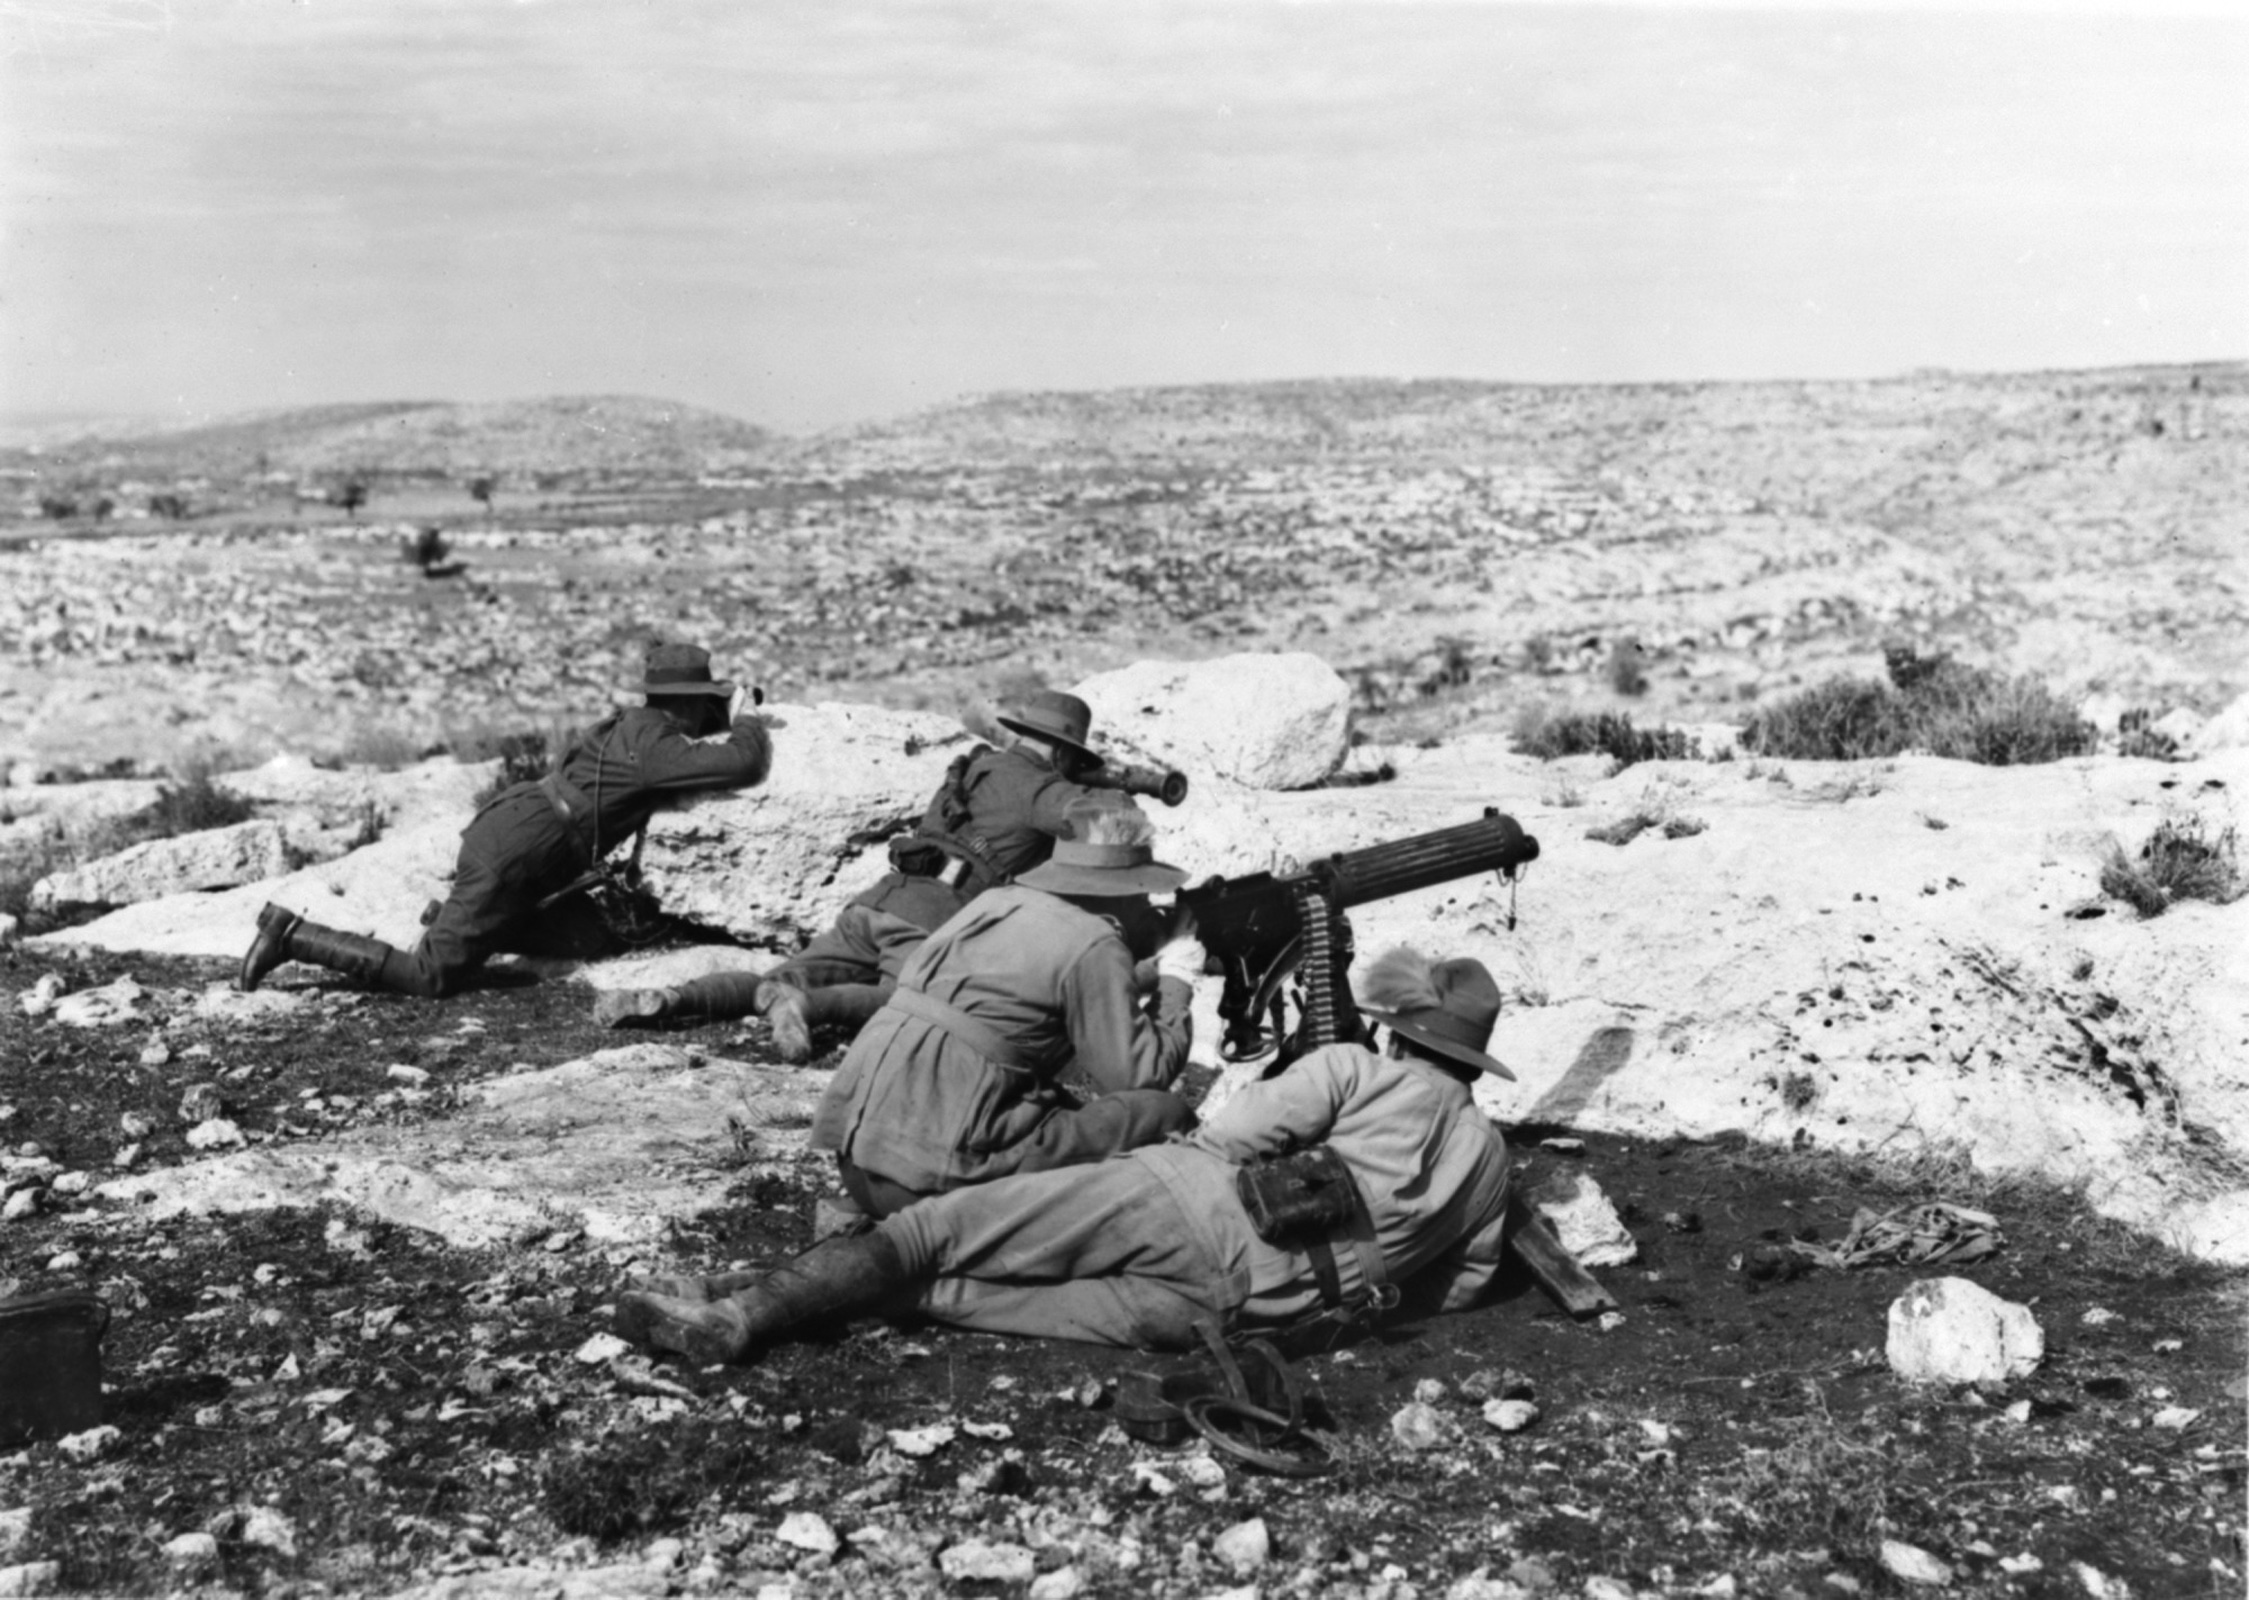 Four unidentified members of the 3rd Australian Light Horse Regiment and machine gun in action at Khurbetha-Ibn-Harith, 31 December 1917